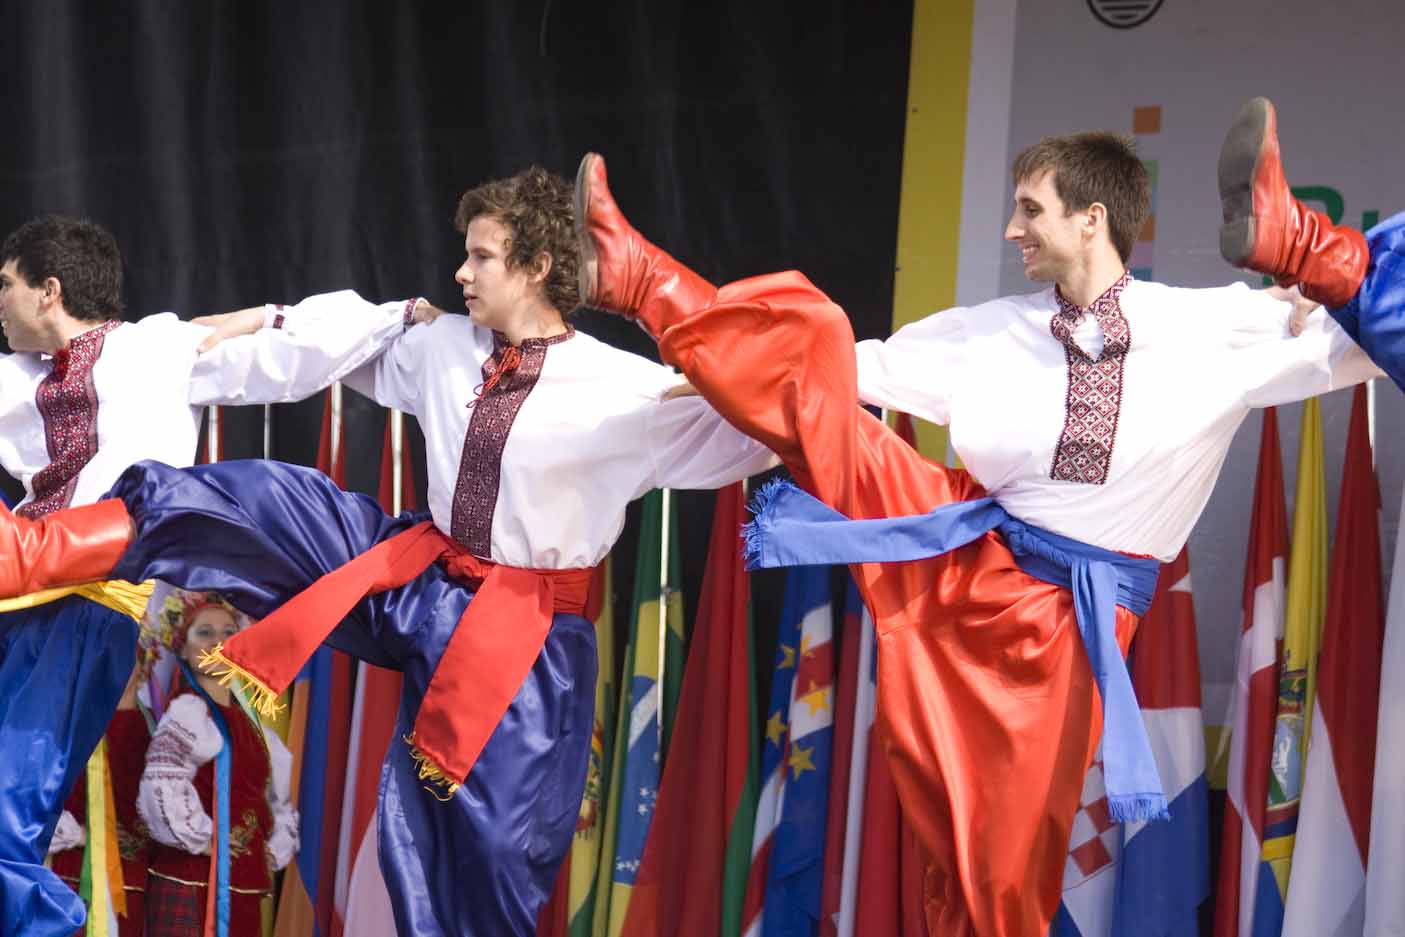 three men in costumes are practicing in front of a bunch of flags